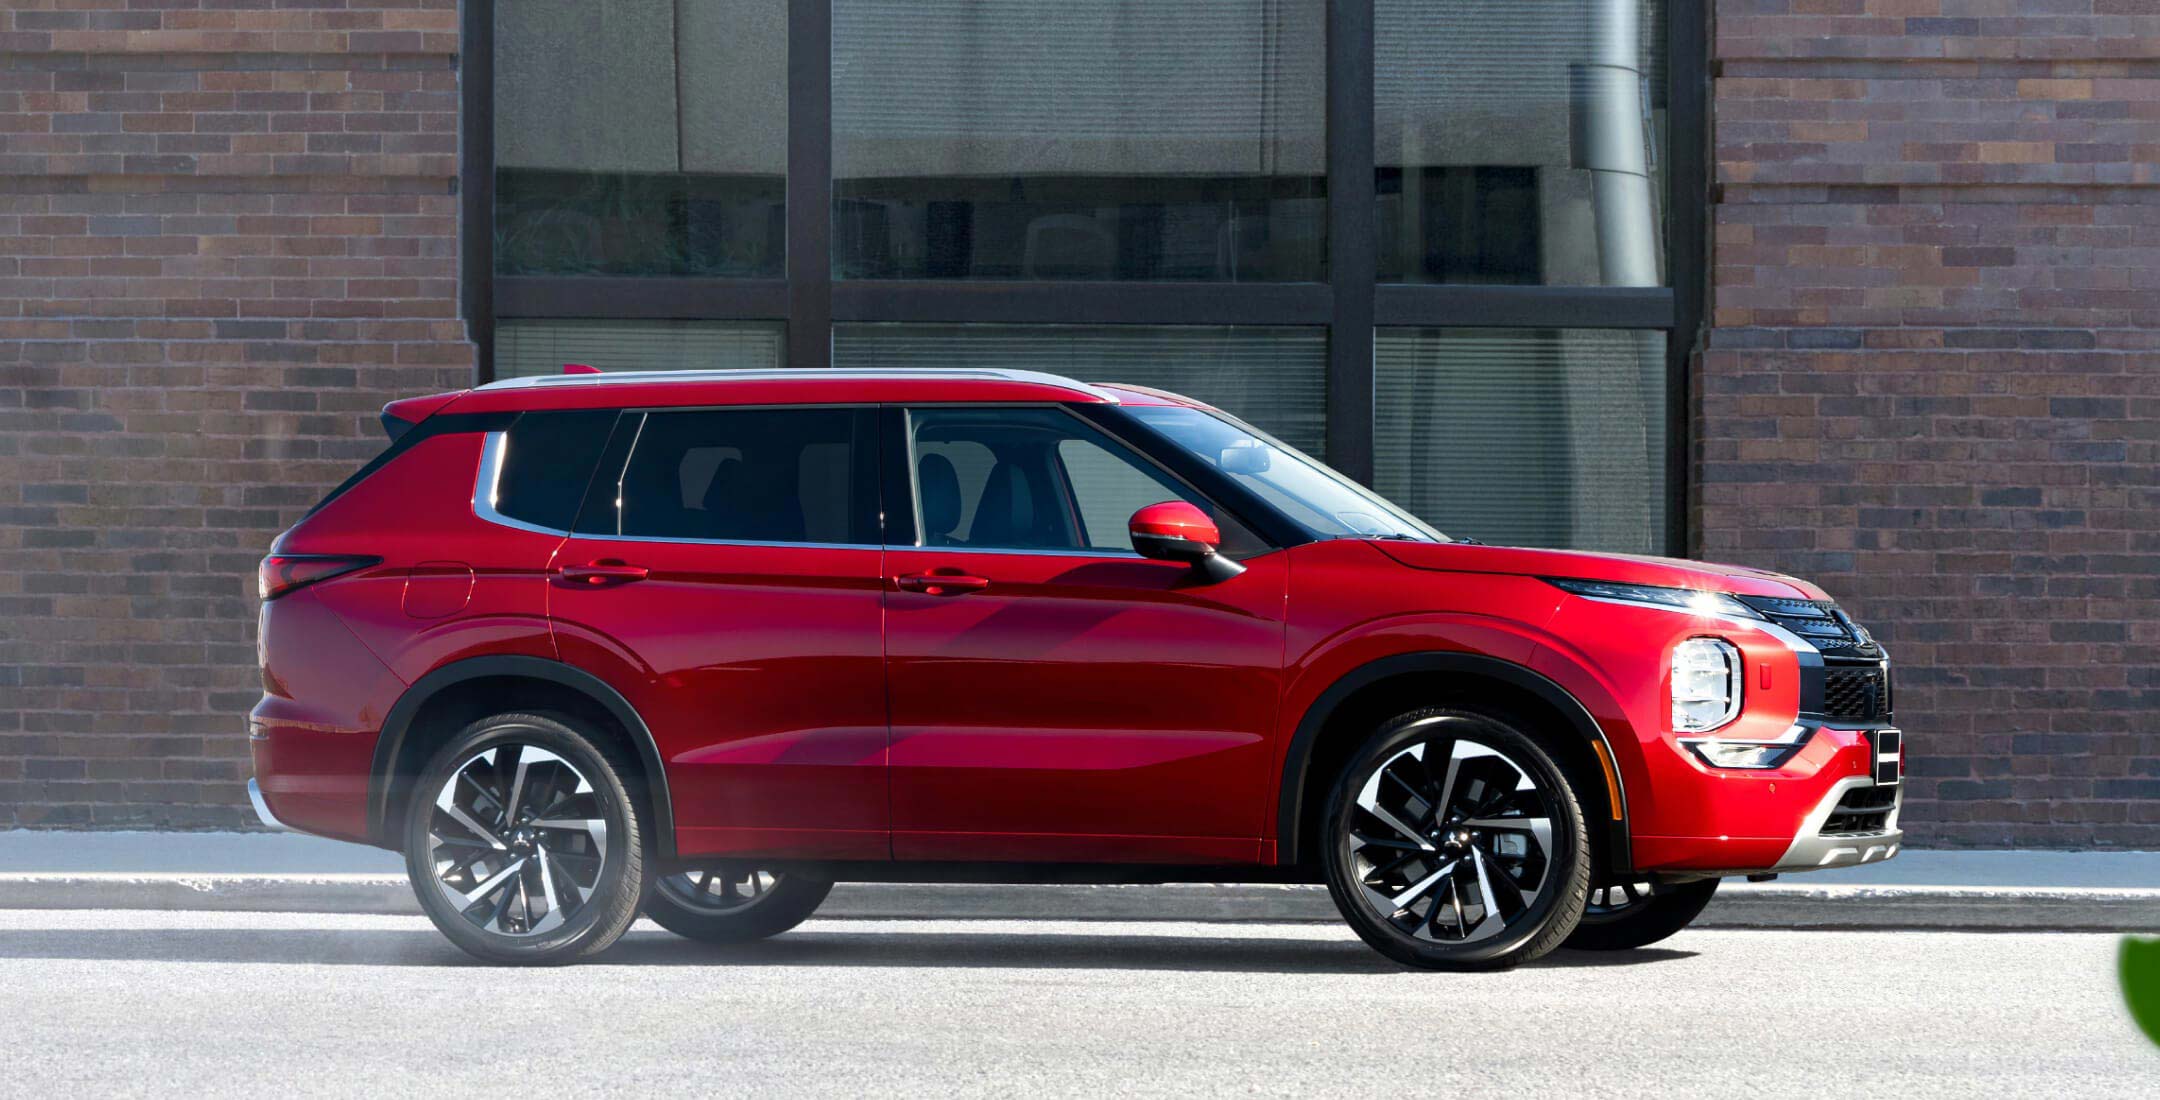 Side profile of a red diamond 2023 Mitsubishi Outlander SUV parked on the road.